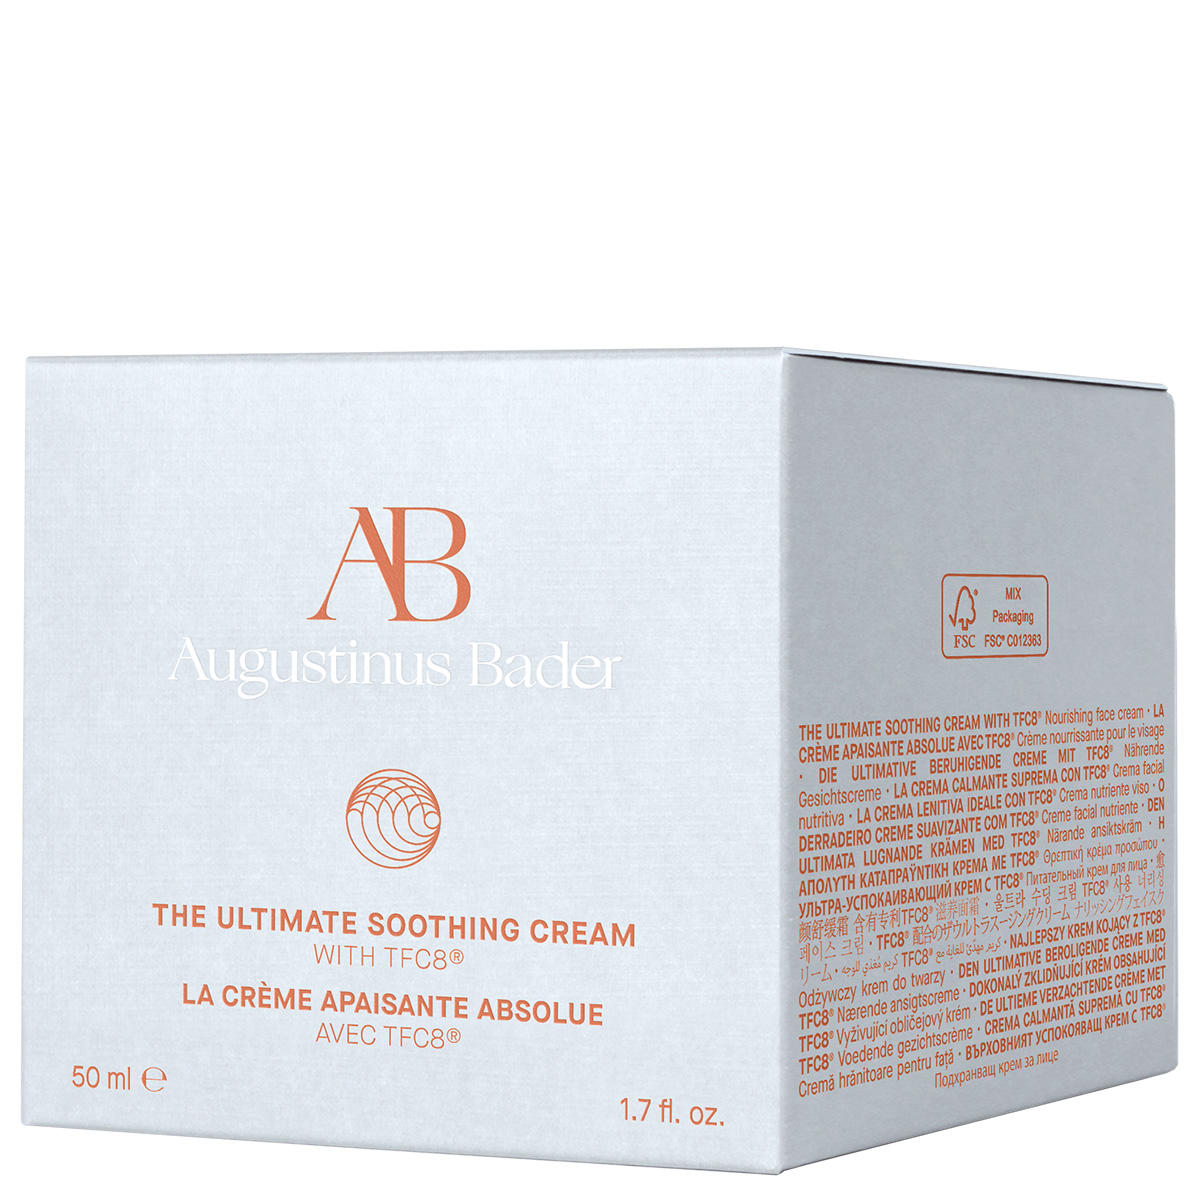 Augustinus Bader The Ultimate Soothing Cream 50 ml - 3